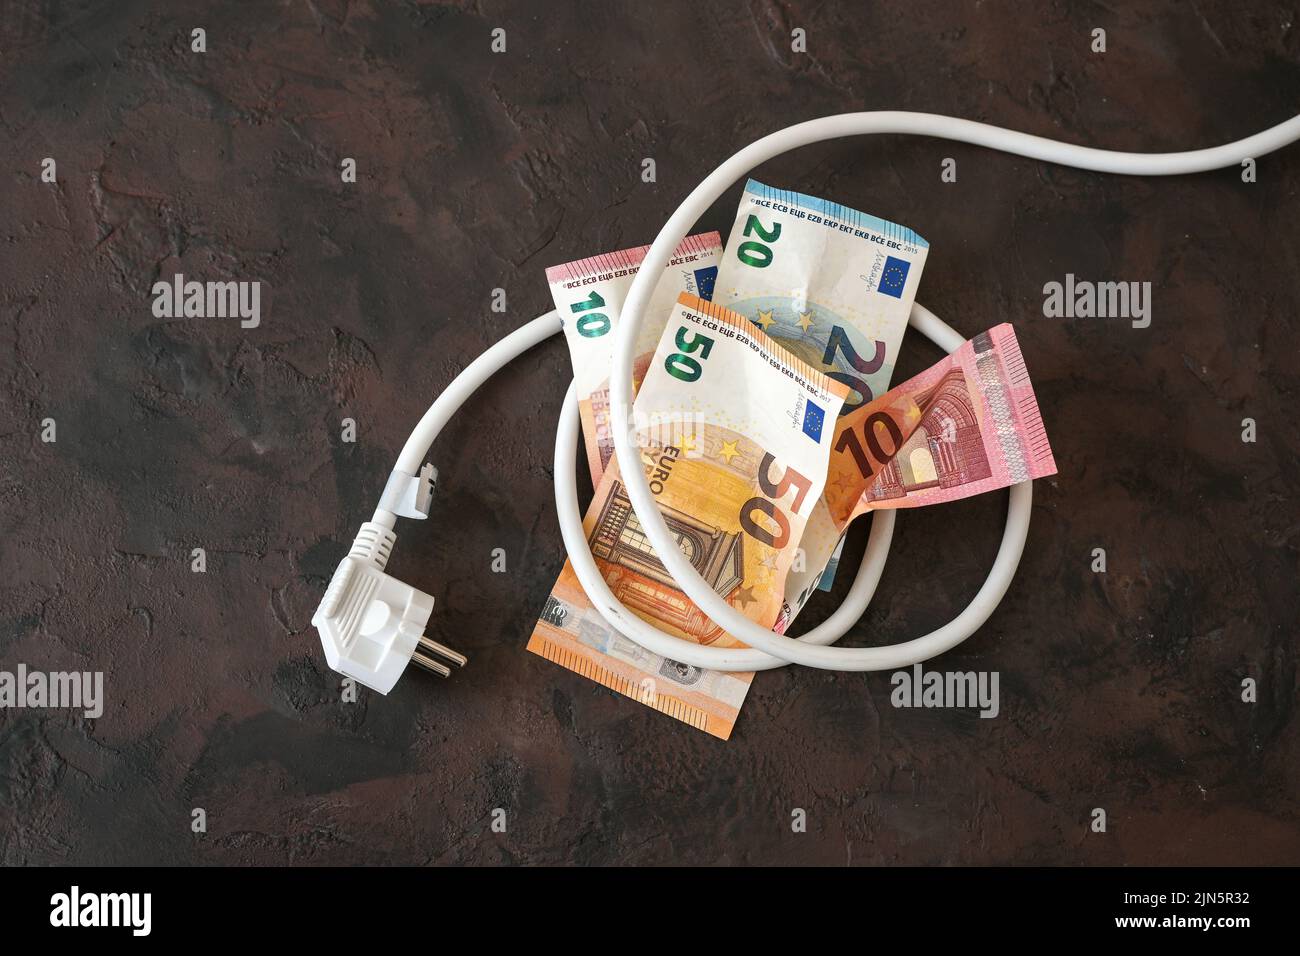 Bundle of euro banknotes tied up with an electric power cable with plug, concept for energy efficiency, power consumption and rising electricity costs Stock Photo